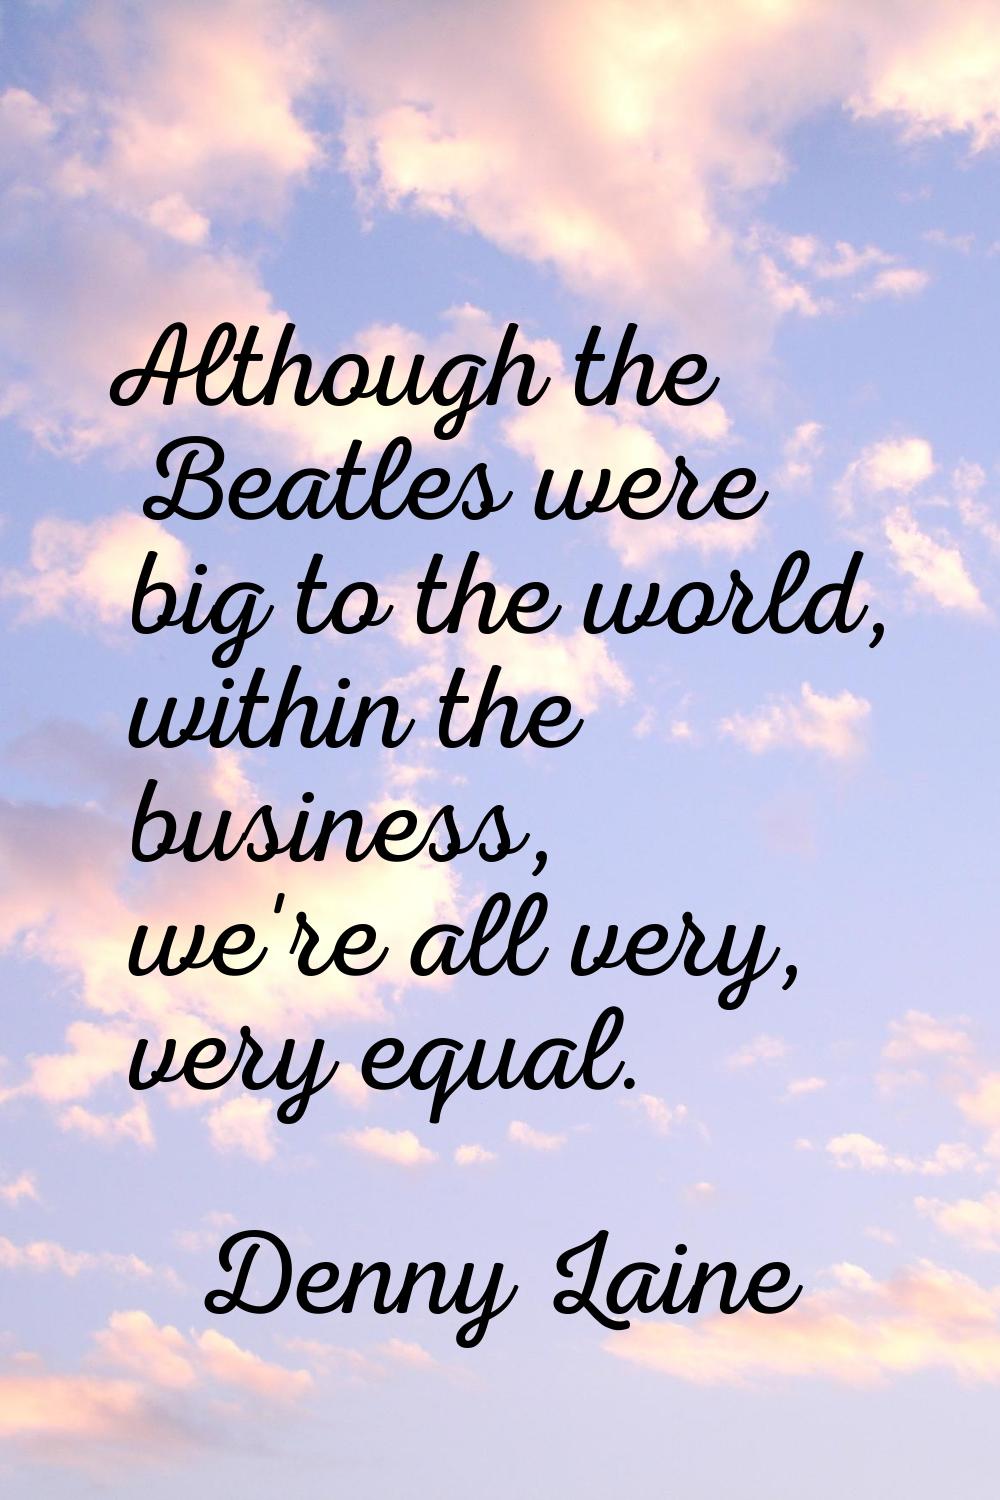 Although the Beatles were big to the world, within the business, we're all very, very equal.